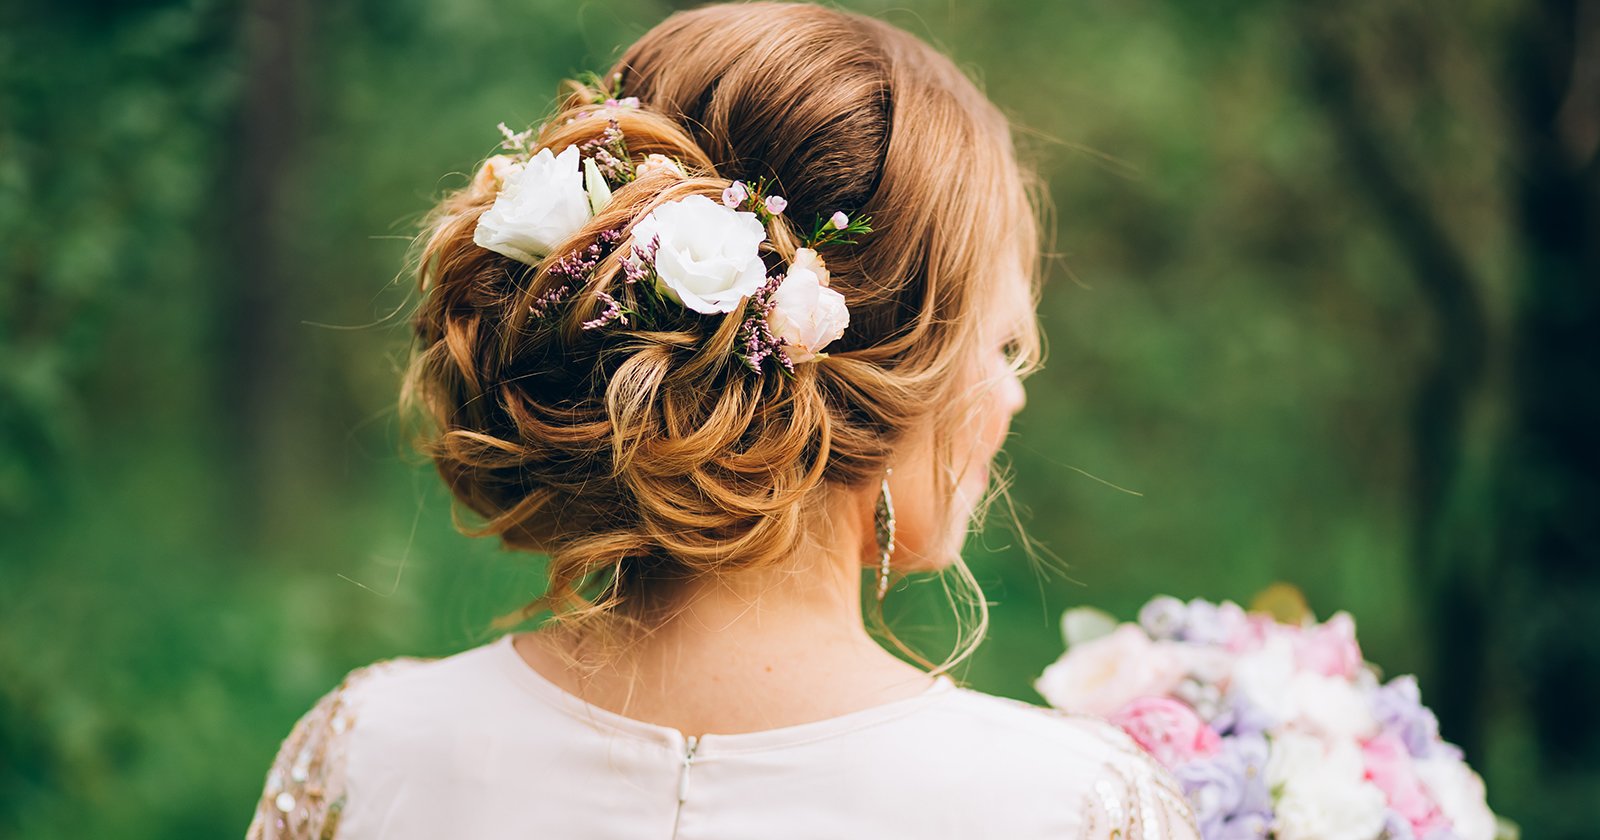 short wedding hairstyles with flower crown  Short wedding hair Wedding  hair inspiration Hair styles